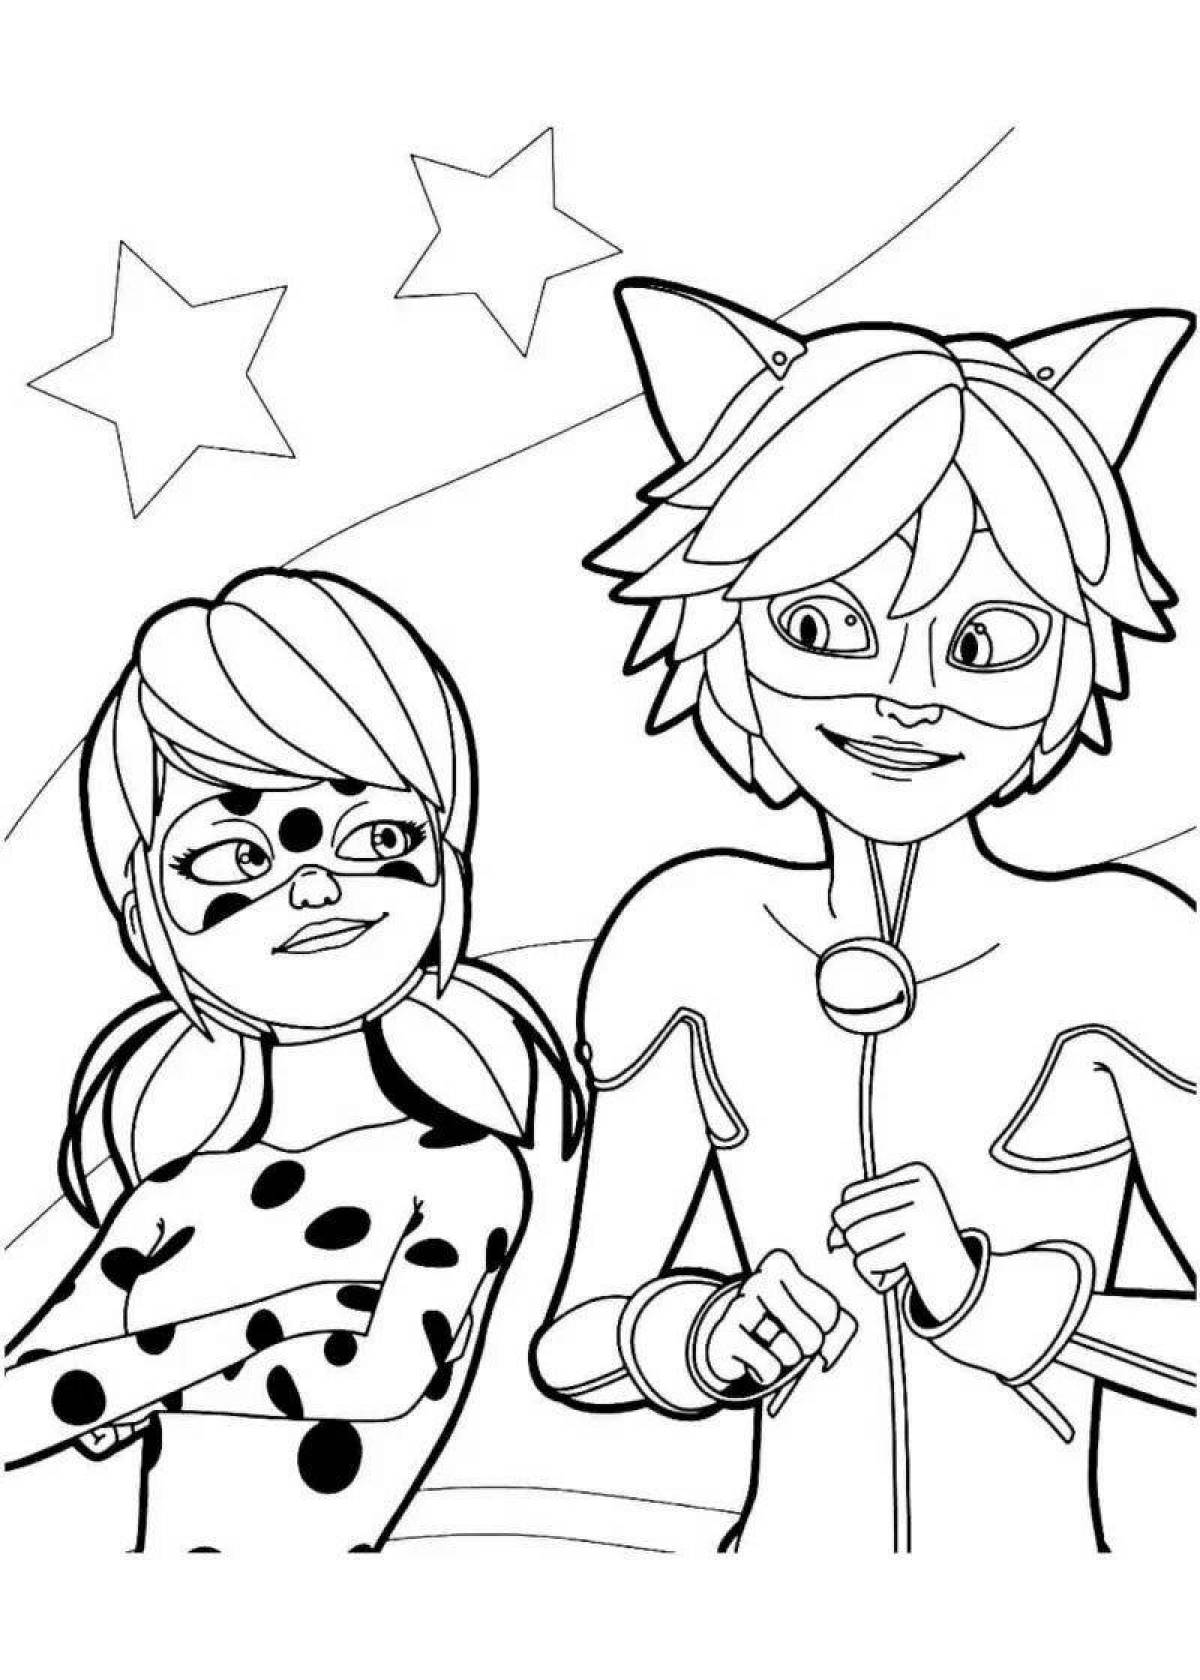 Amazing super cat coloring page for kids